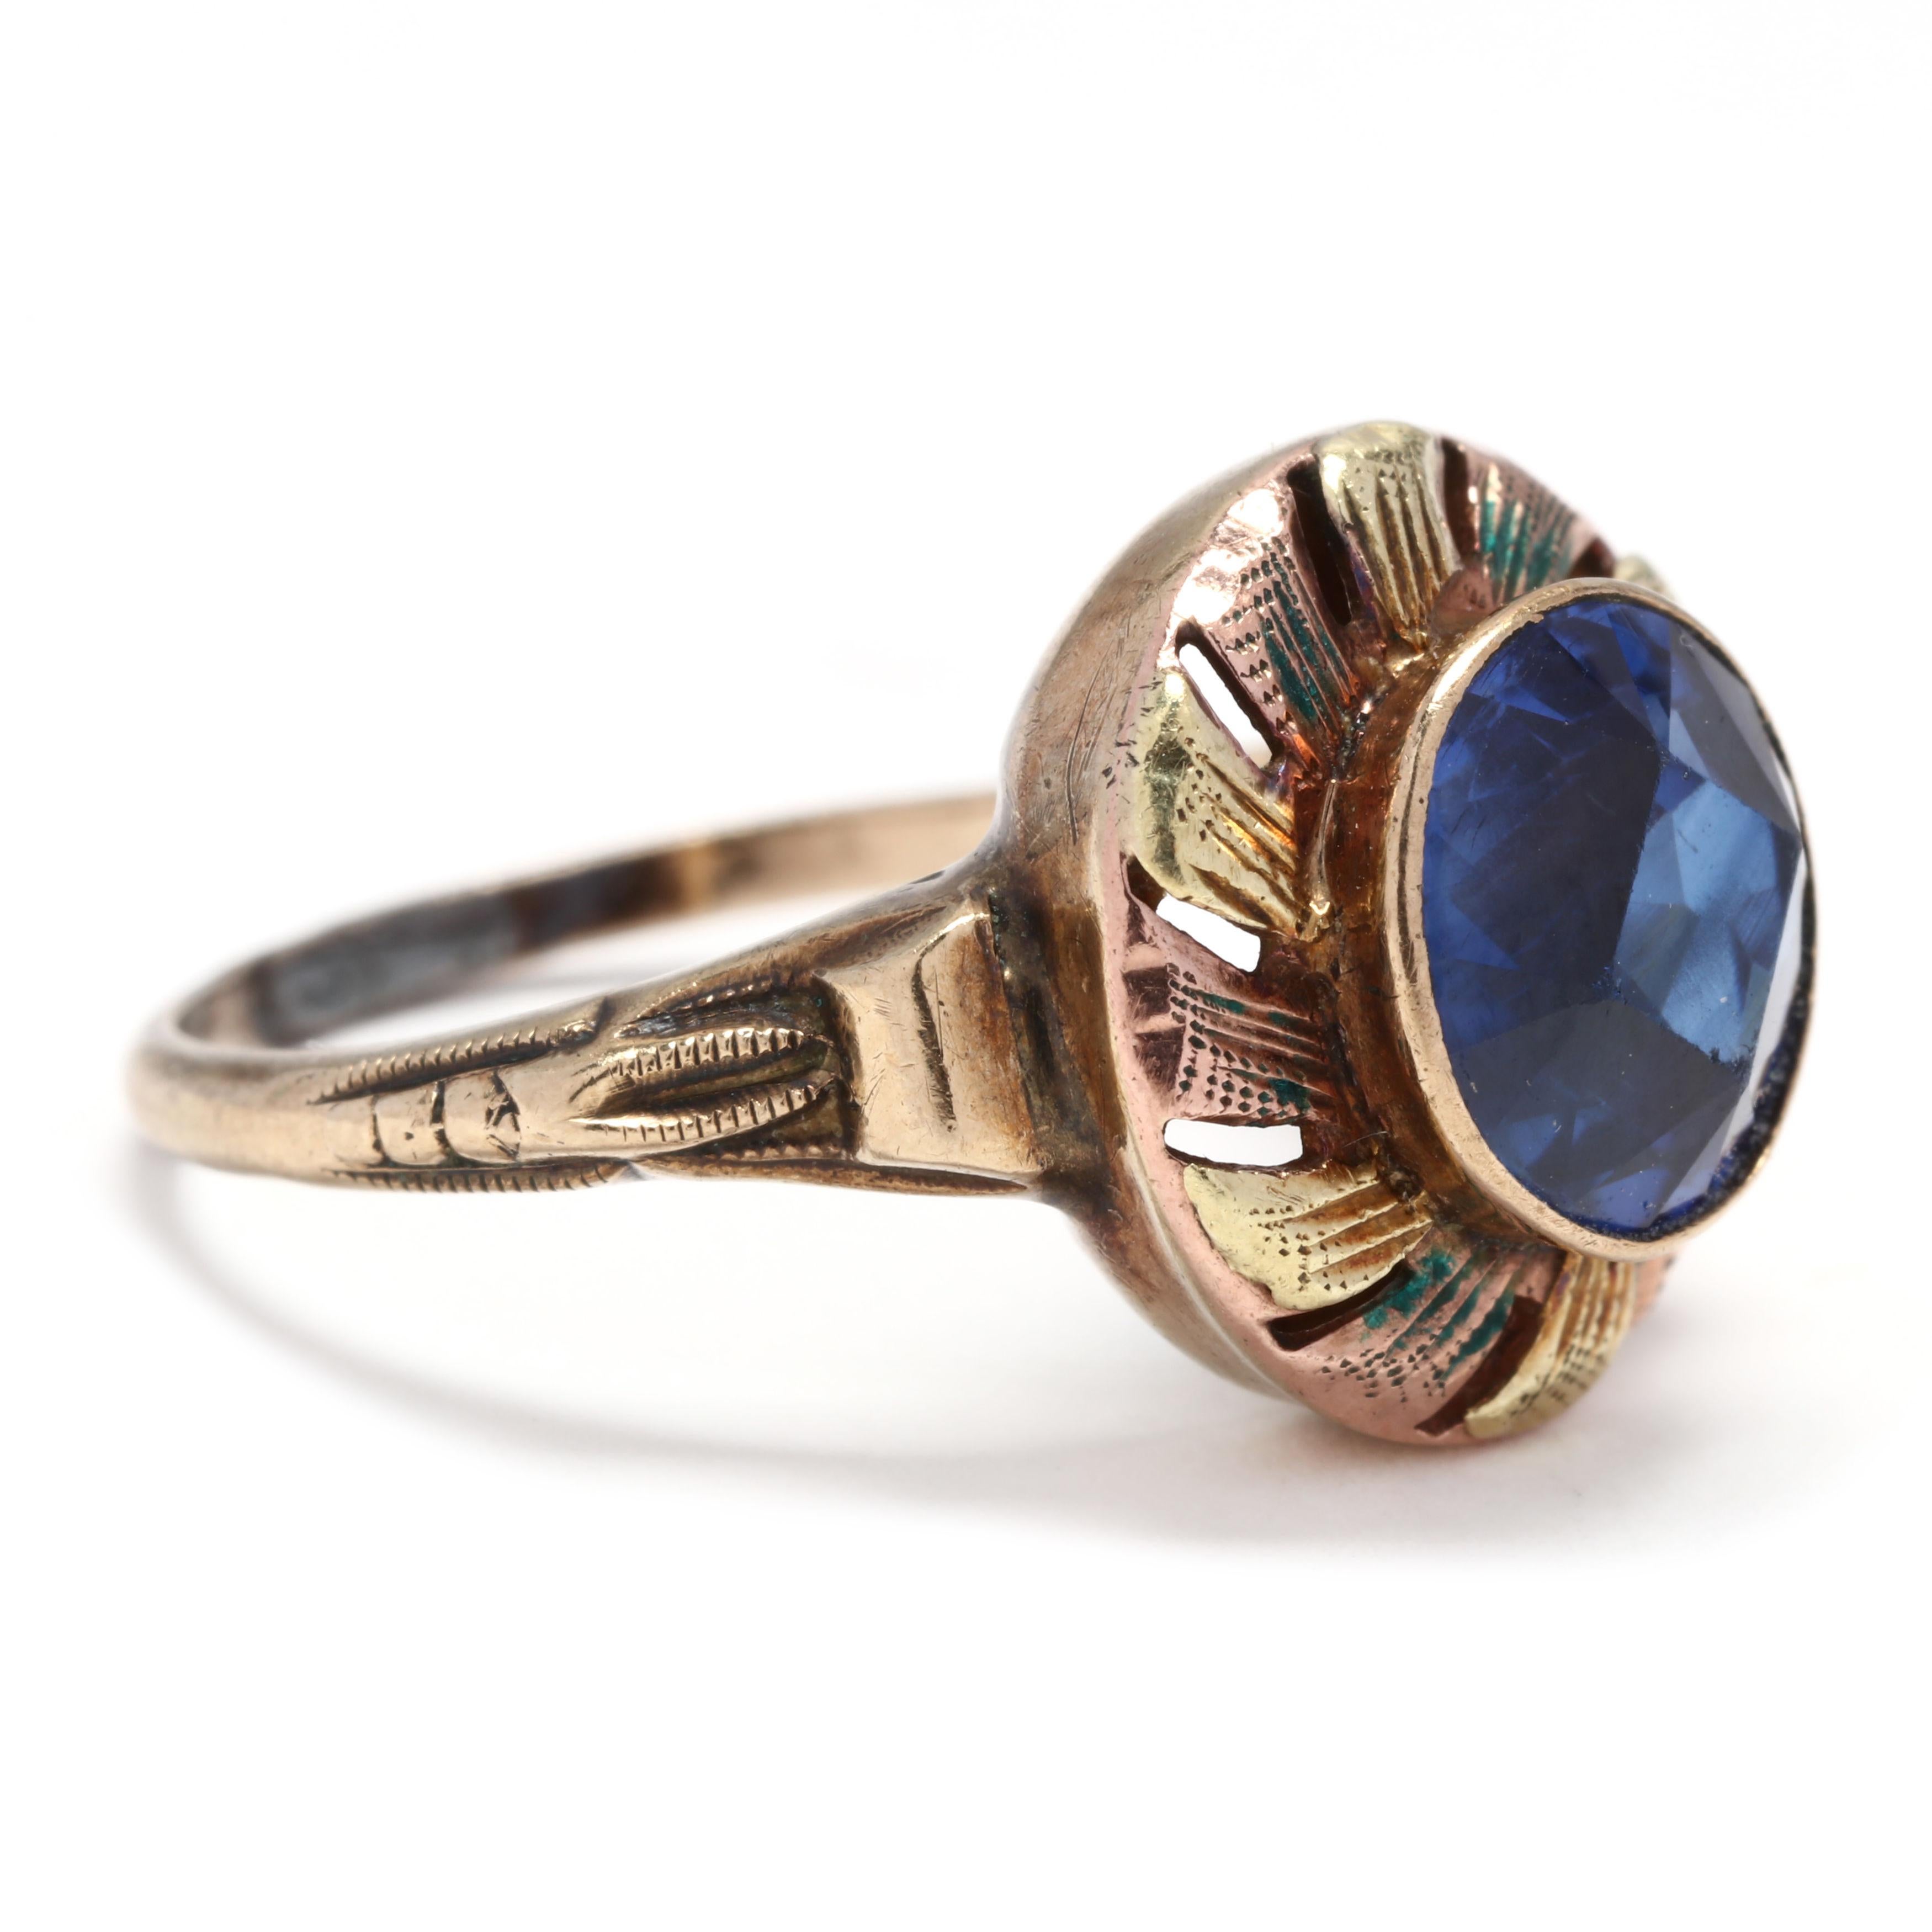 A vintage 10 karat yellow and rose gold, blue stone and enamel ring. This ring features a bezel set, round cut blue stone surrounded by a ribbon like halo of alternating yellow and rose gold engraved sections and minor blue enamel accents.



Ring